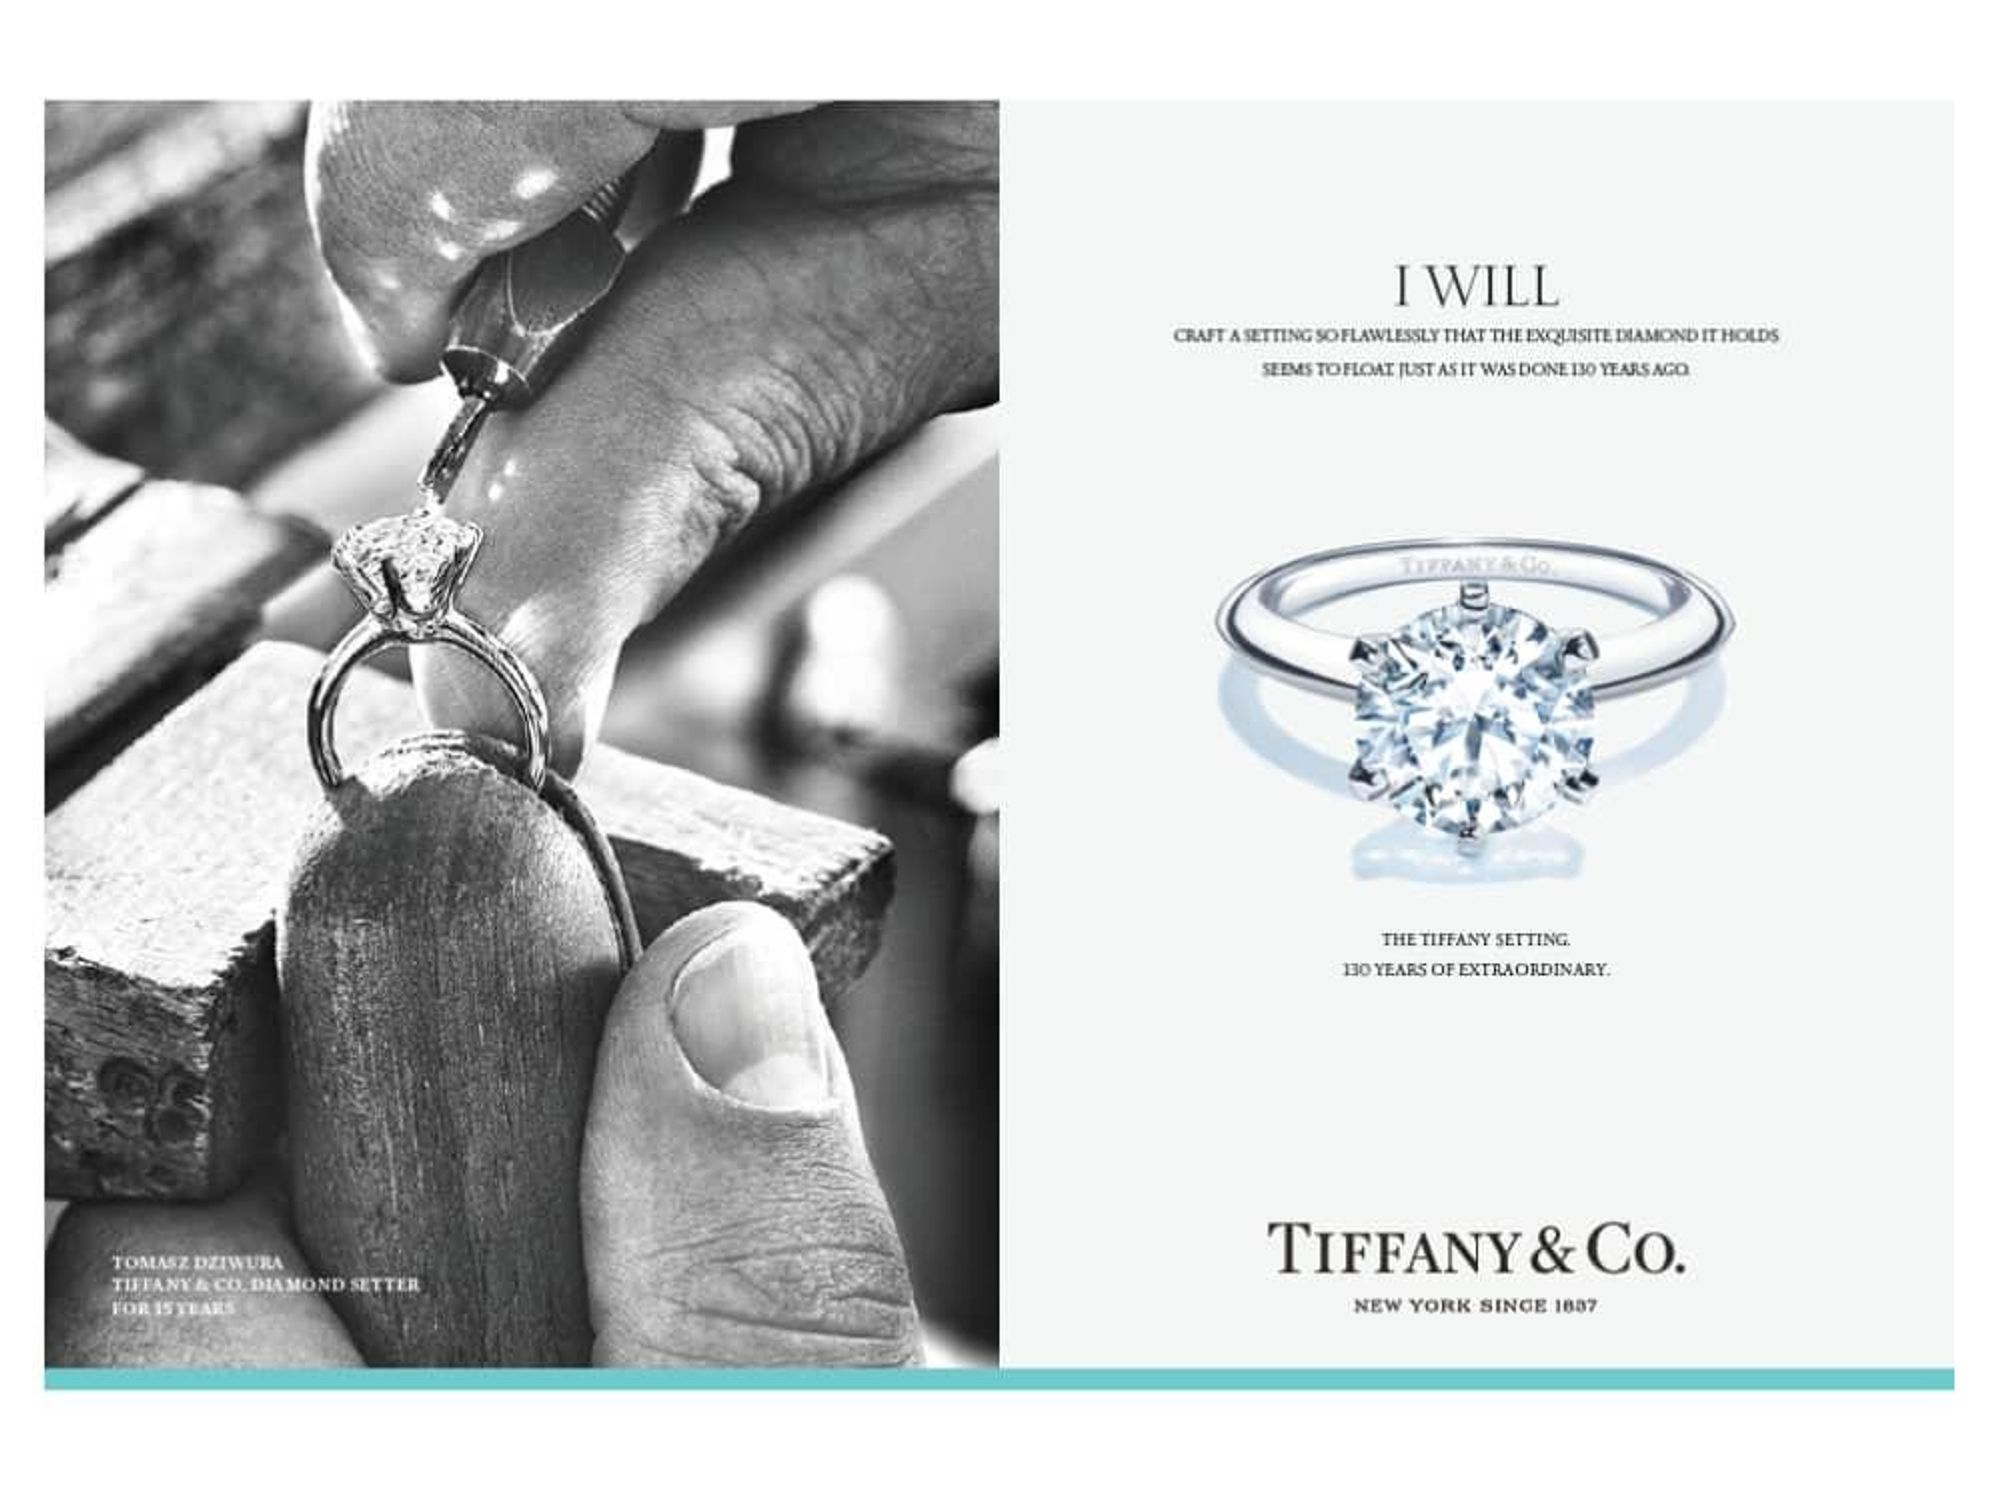 Tiffany Customers Opt for Plan White Bags - The Jewelry Magazine